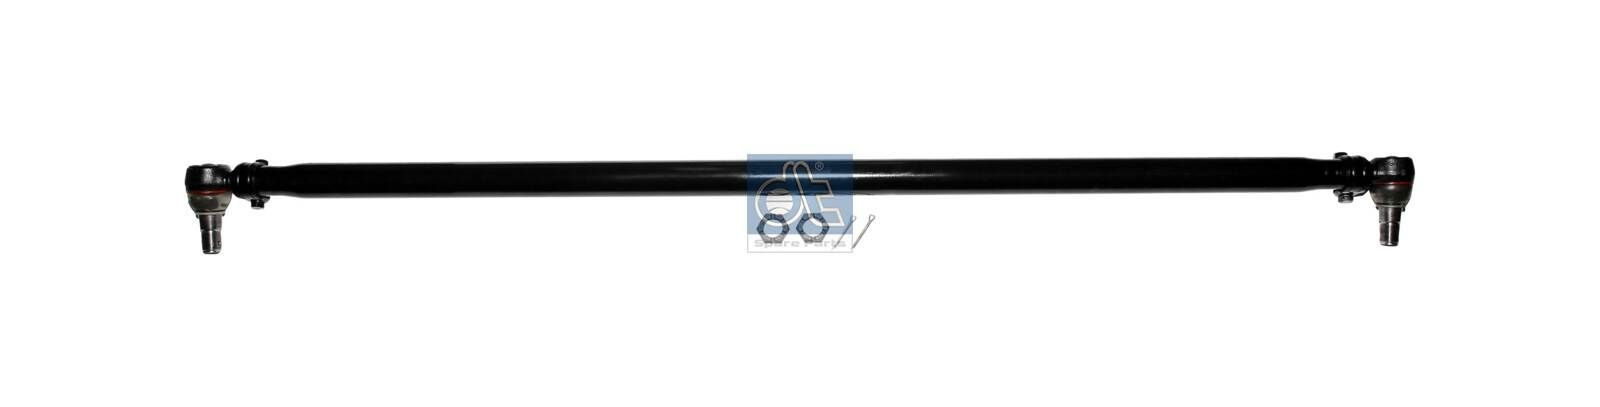 DT Spare Parts 4.64597 Rod Assembly 942 330 03 03